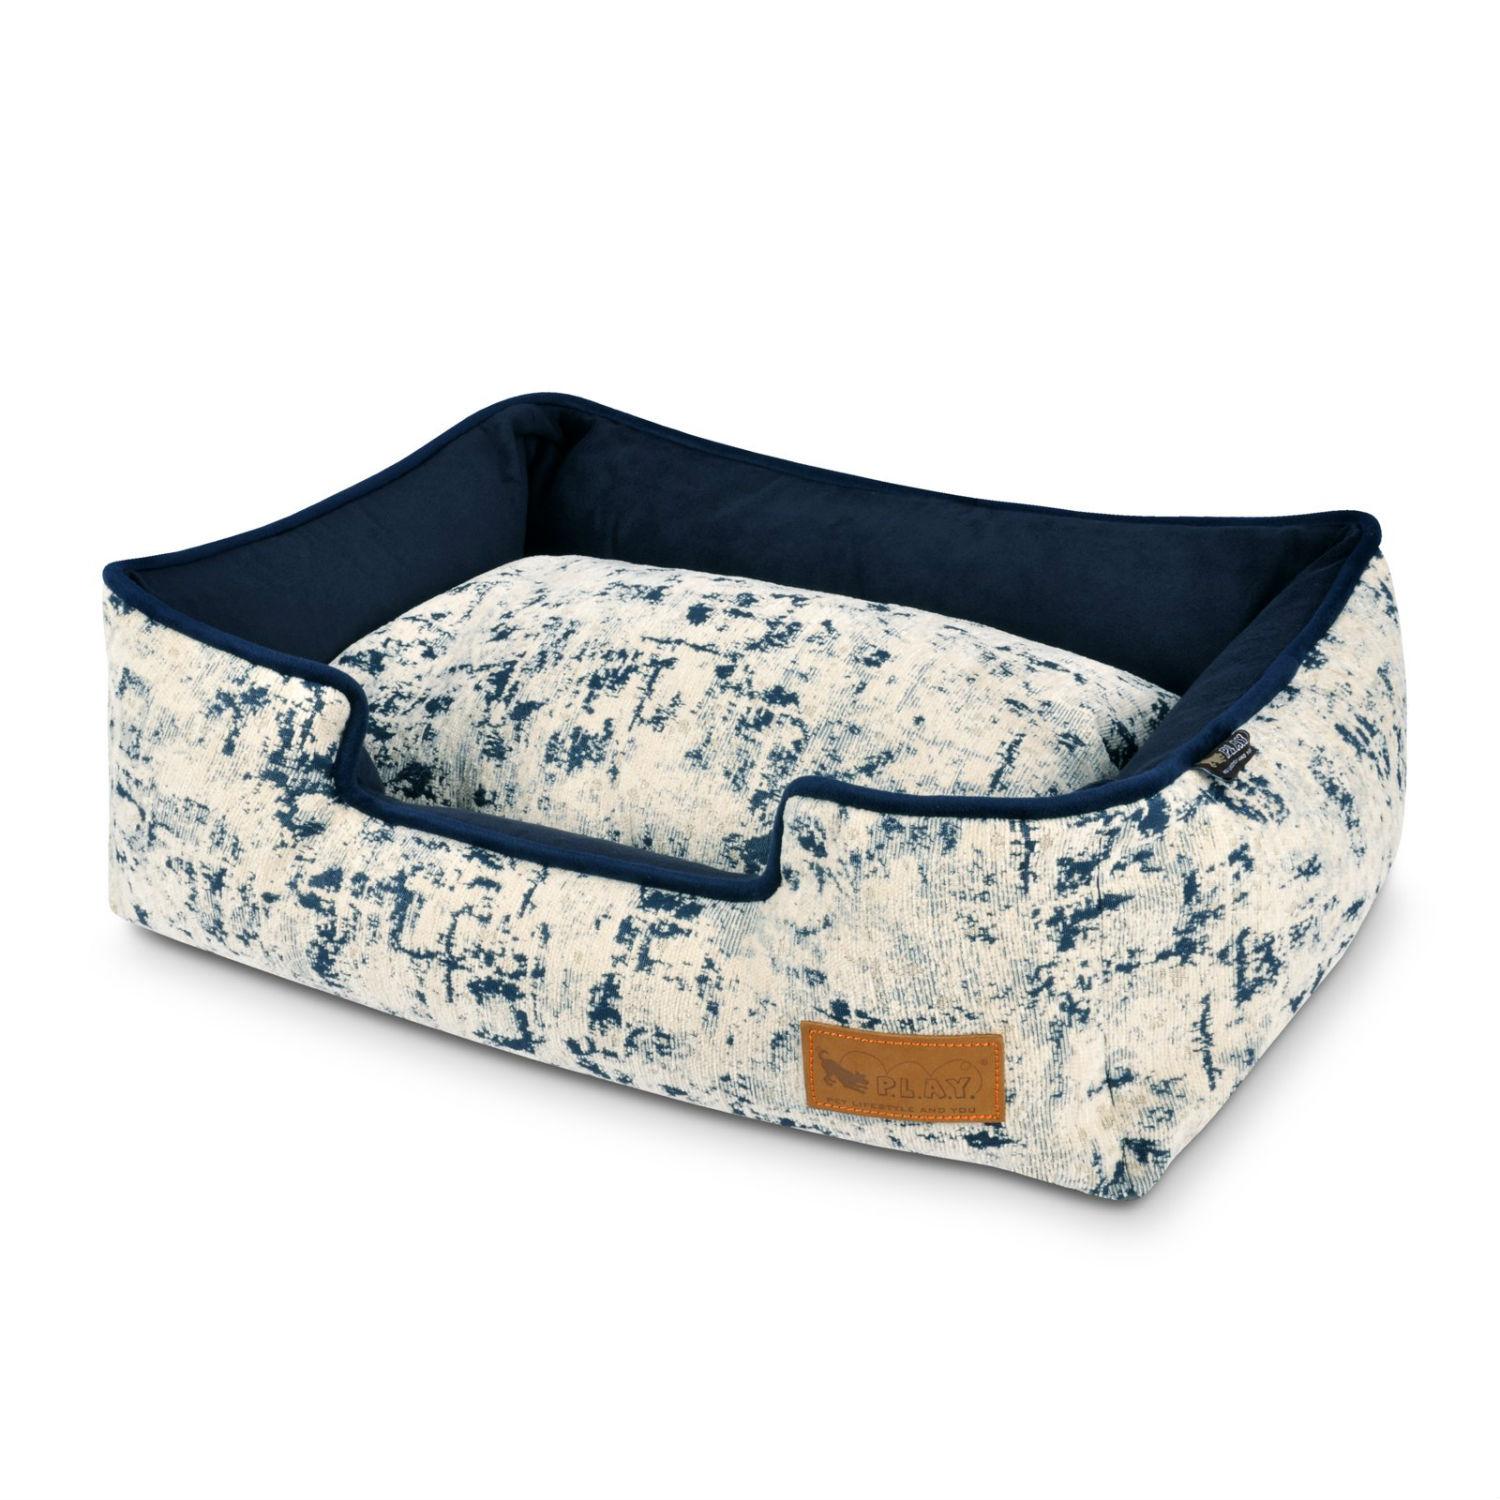 P.L.A.Y. Celestial Lounge Dog Bed - Midnight Blue